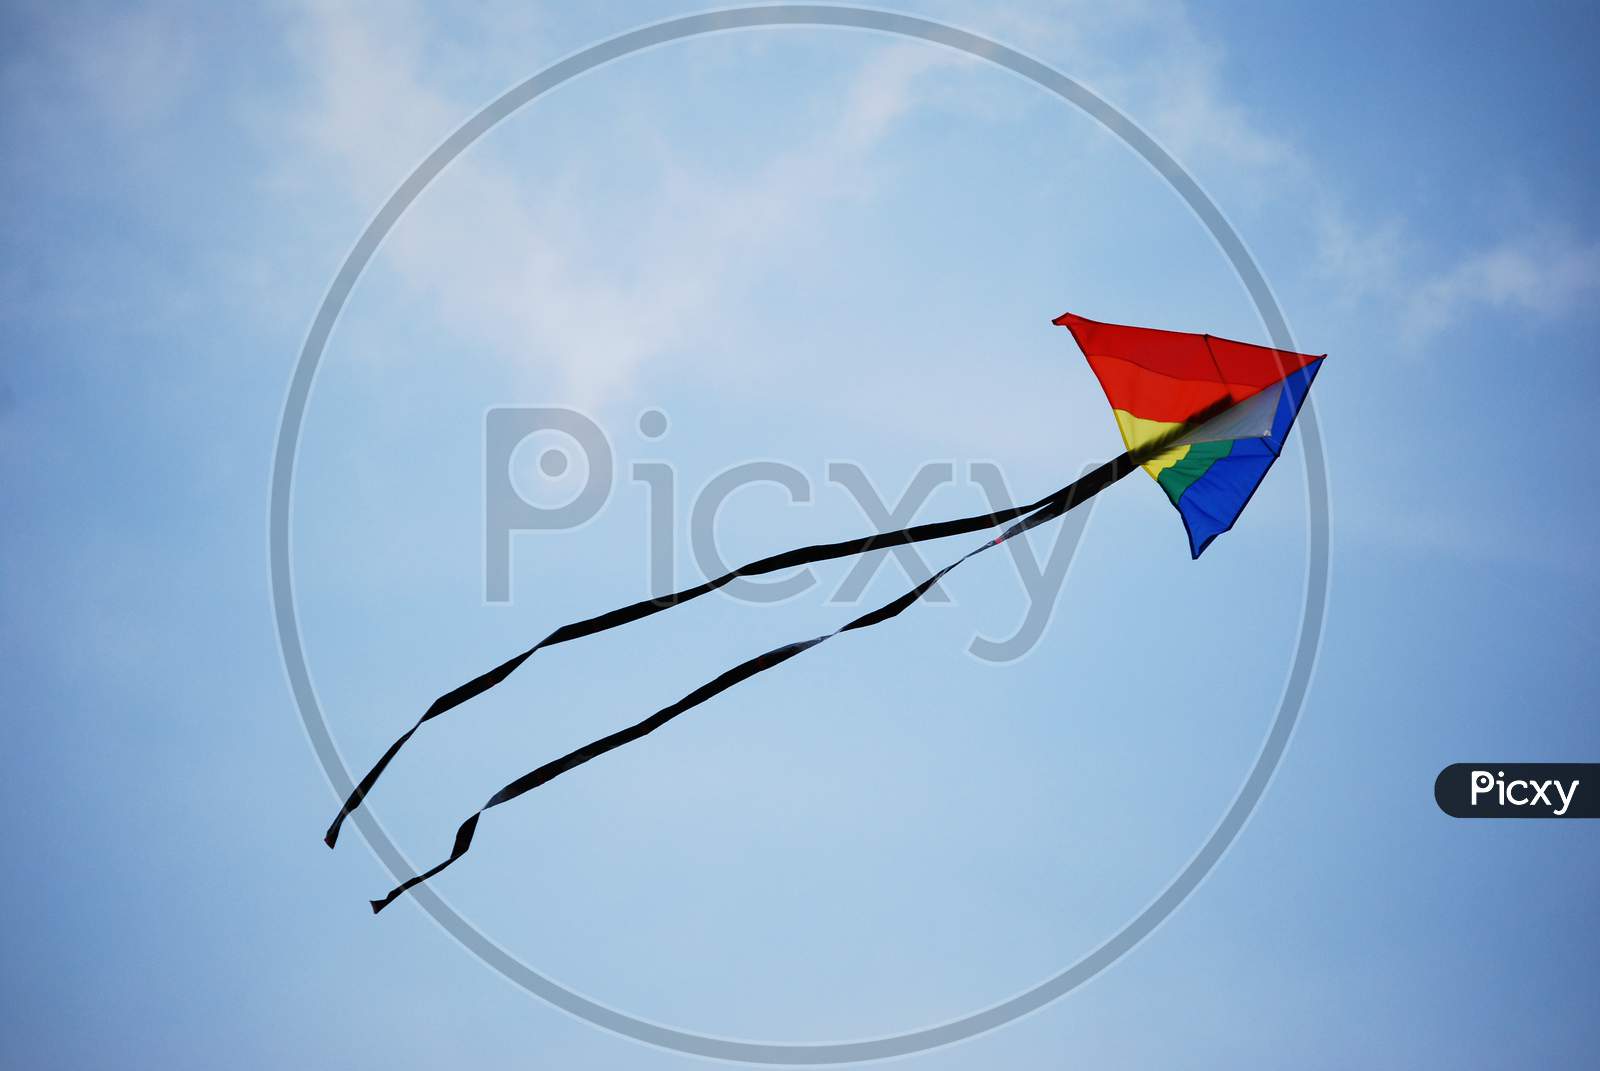 A colored kite flying high in the sky